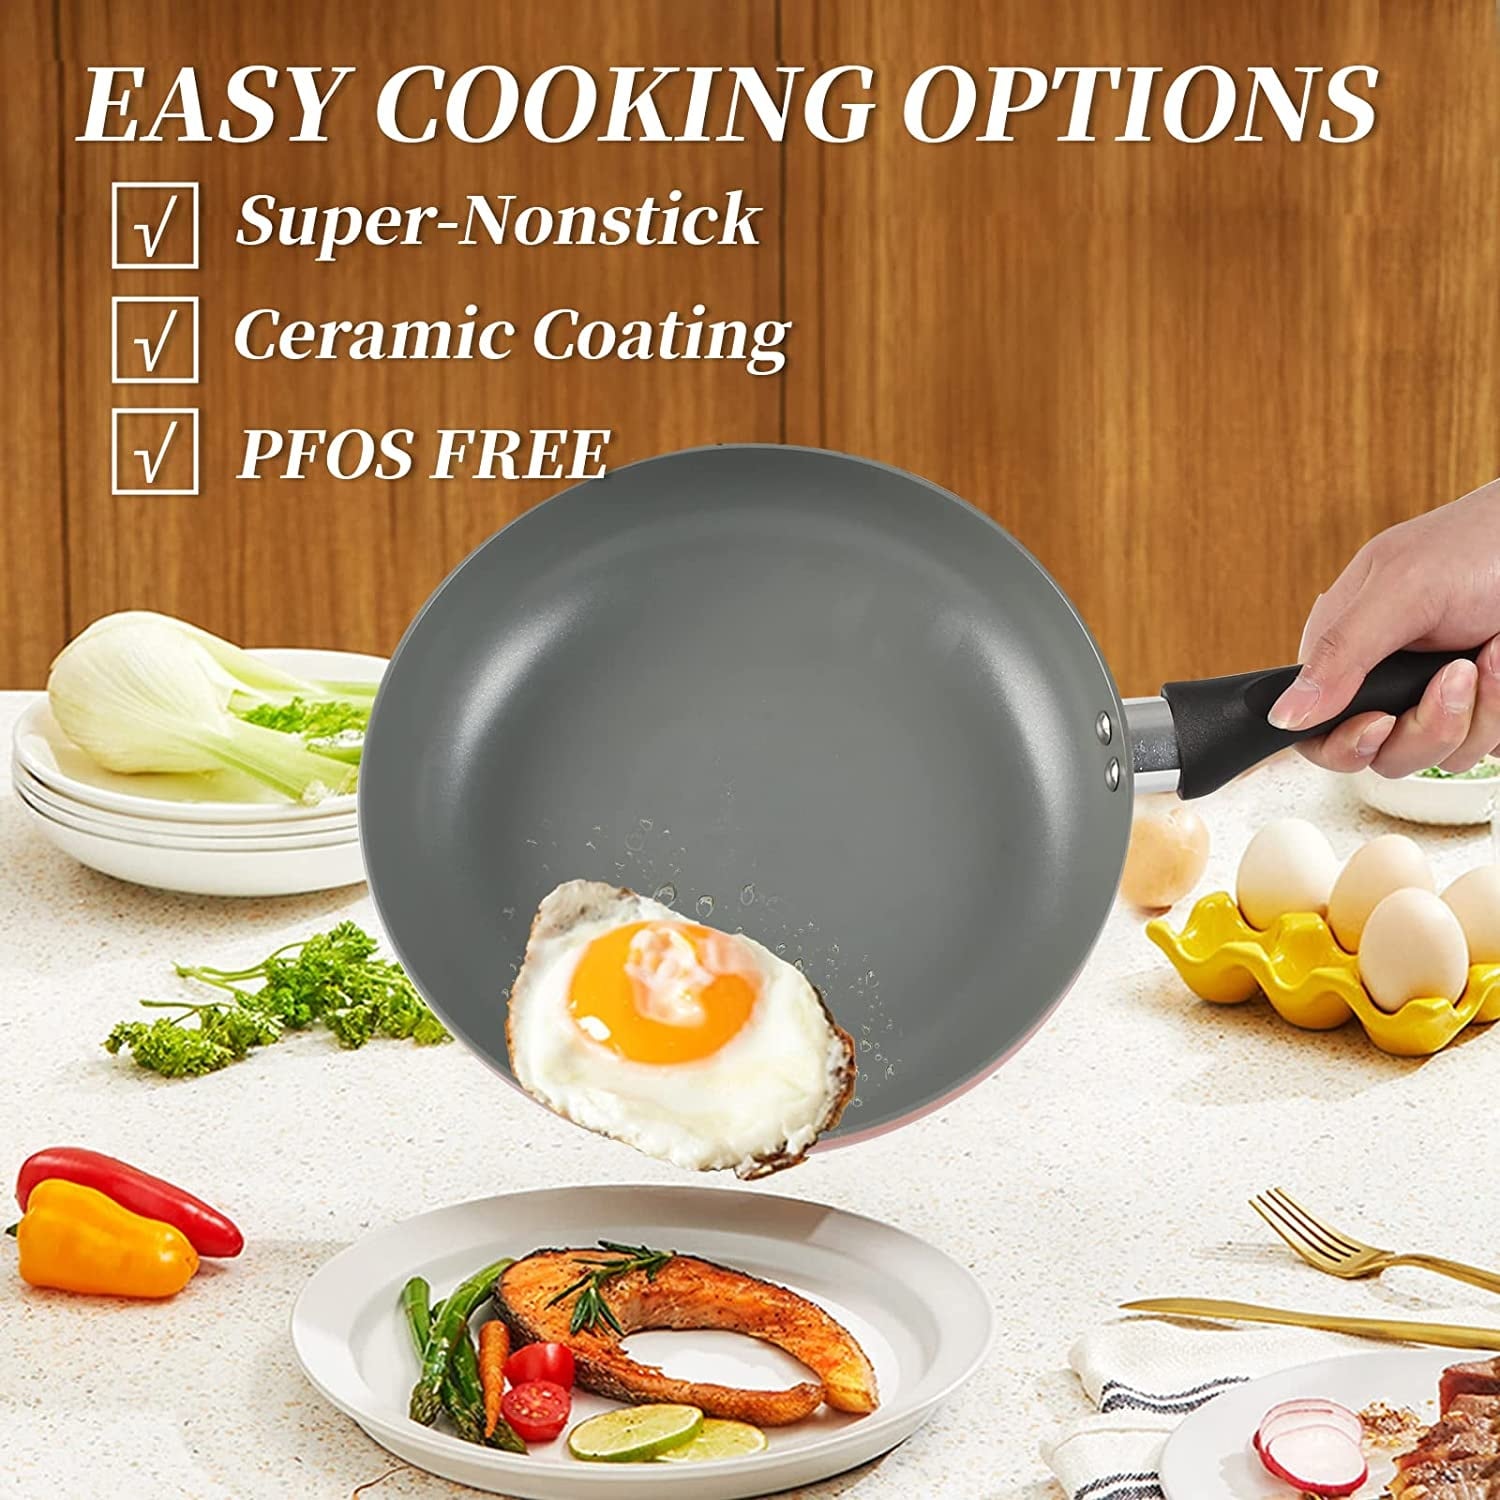 https://ak1.ostkcdn.com/images/products/is/images/direct/676dda39b0c9601fcb8d0ac7897aa746fe1f6b64/12-Piece-Nonstick-Pots-and-Pans-Sets%2CKitchen-Cookware-with-Ceramic-Coating%2CDishwasher-Safe%2CFrying-Pan-Set-with-Lid.jpg